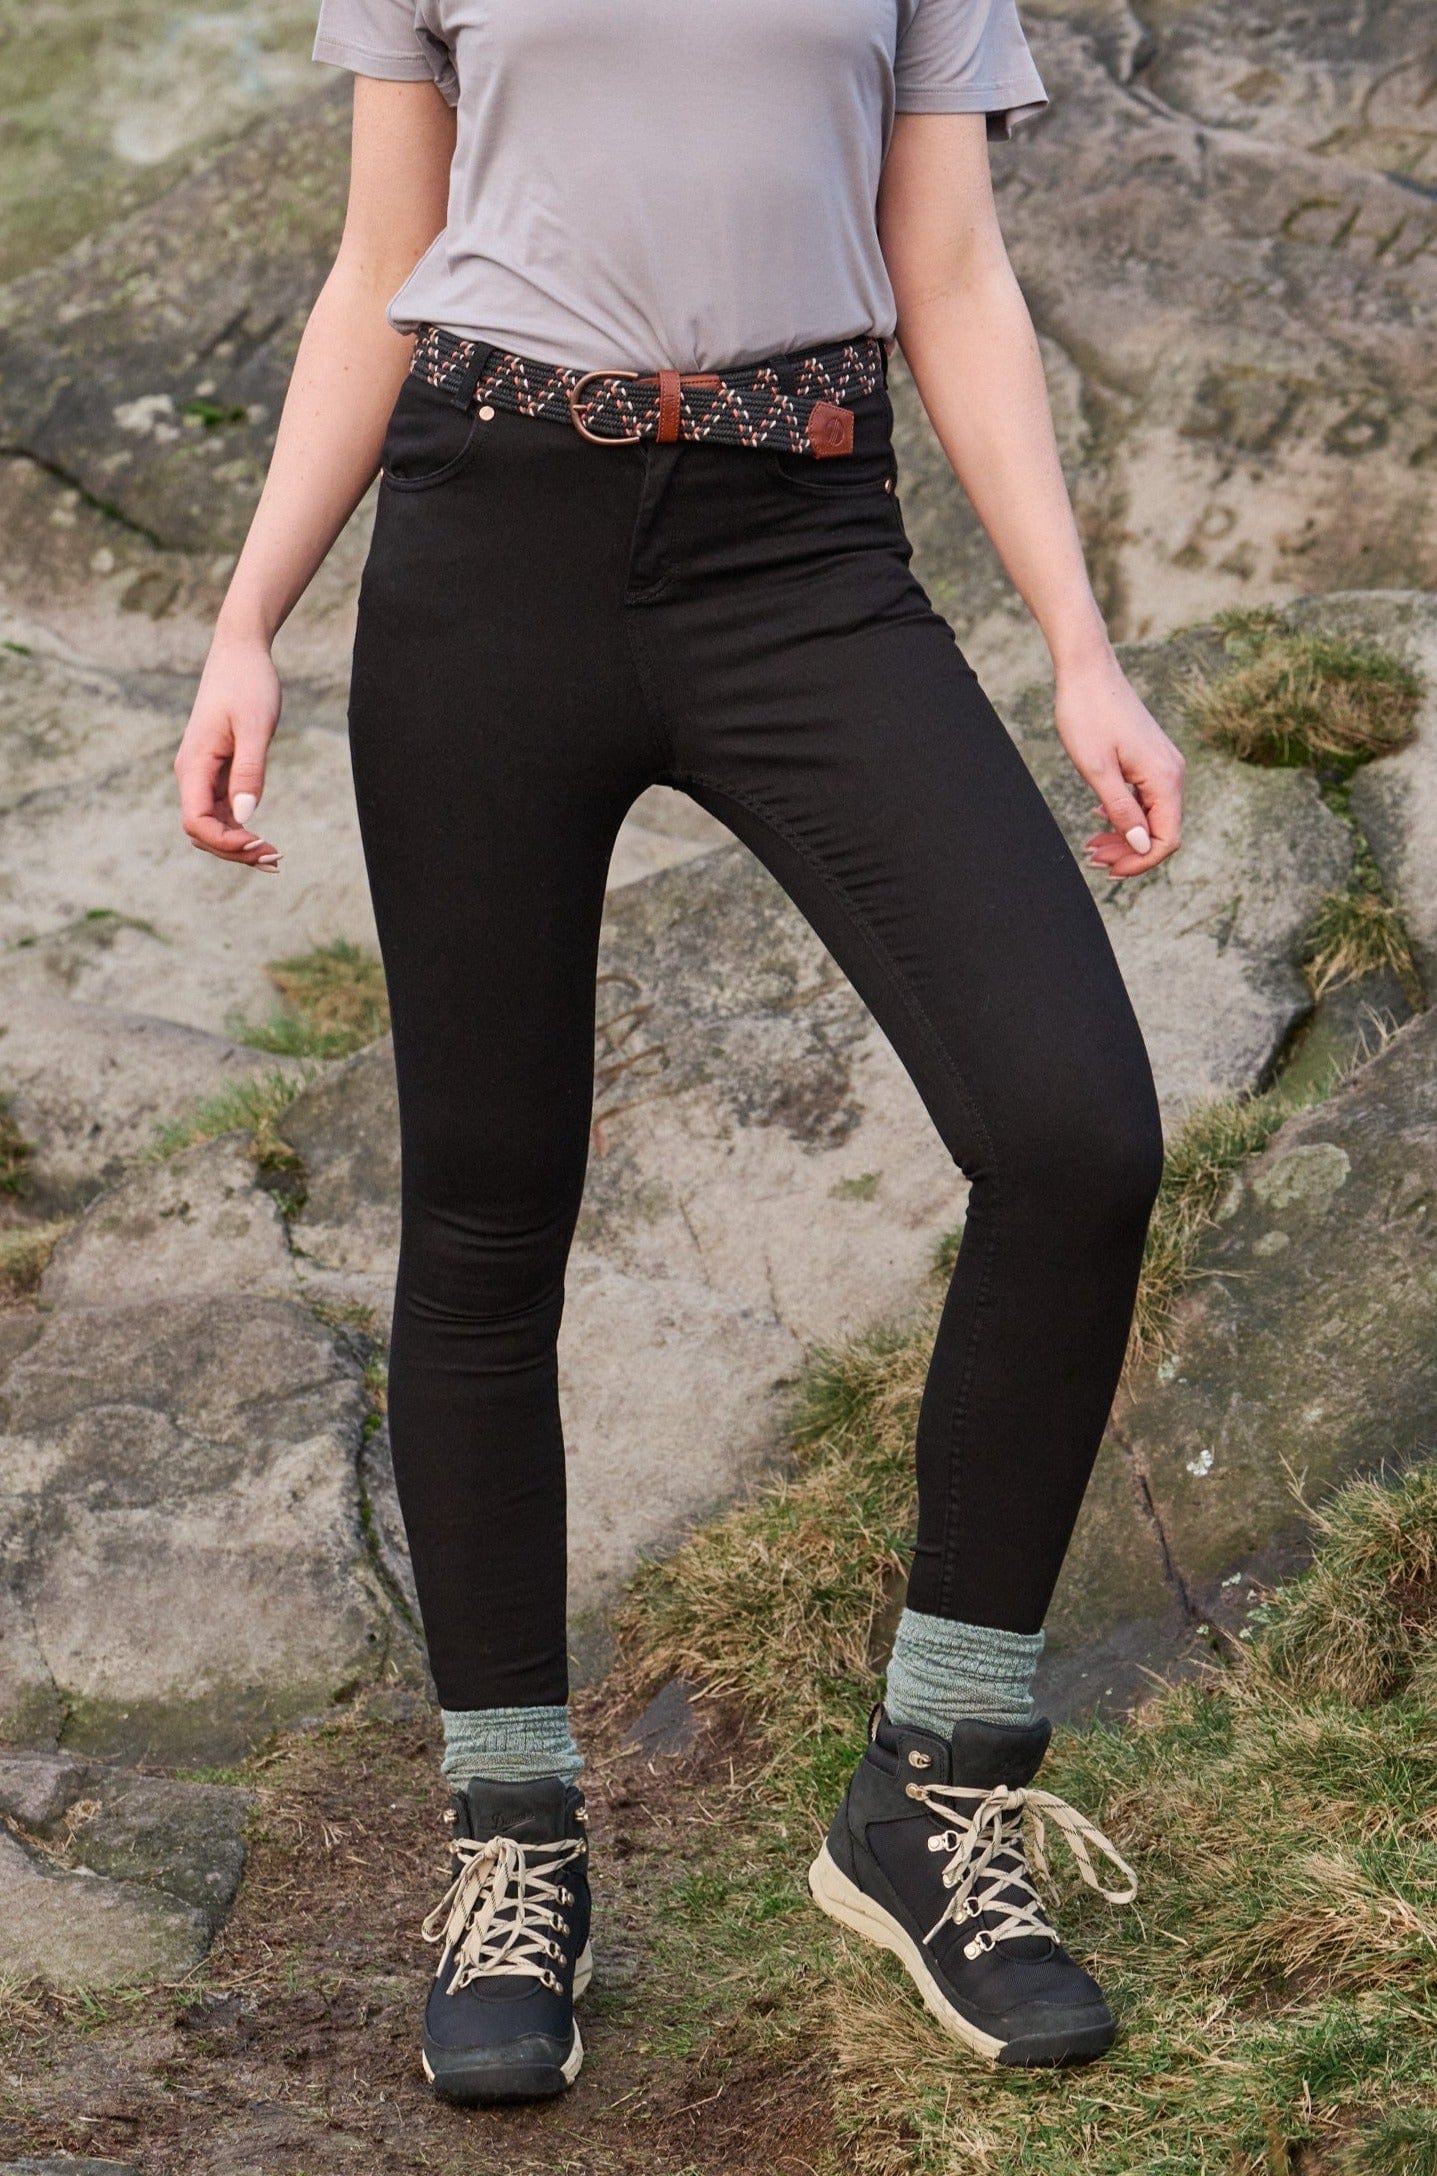 The Skinny Outdoor Jeans - Black Denim Trousers  